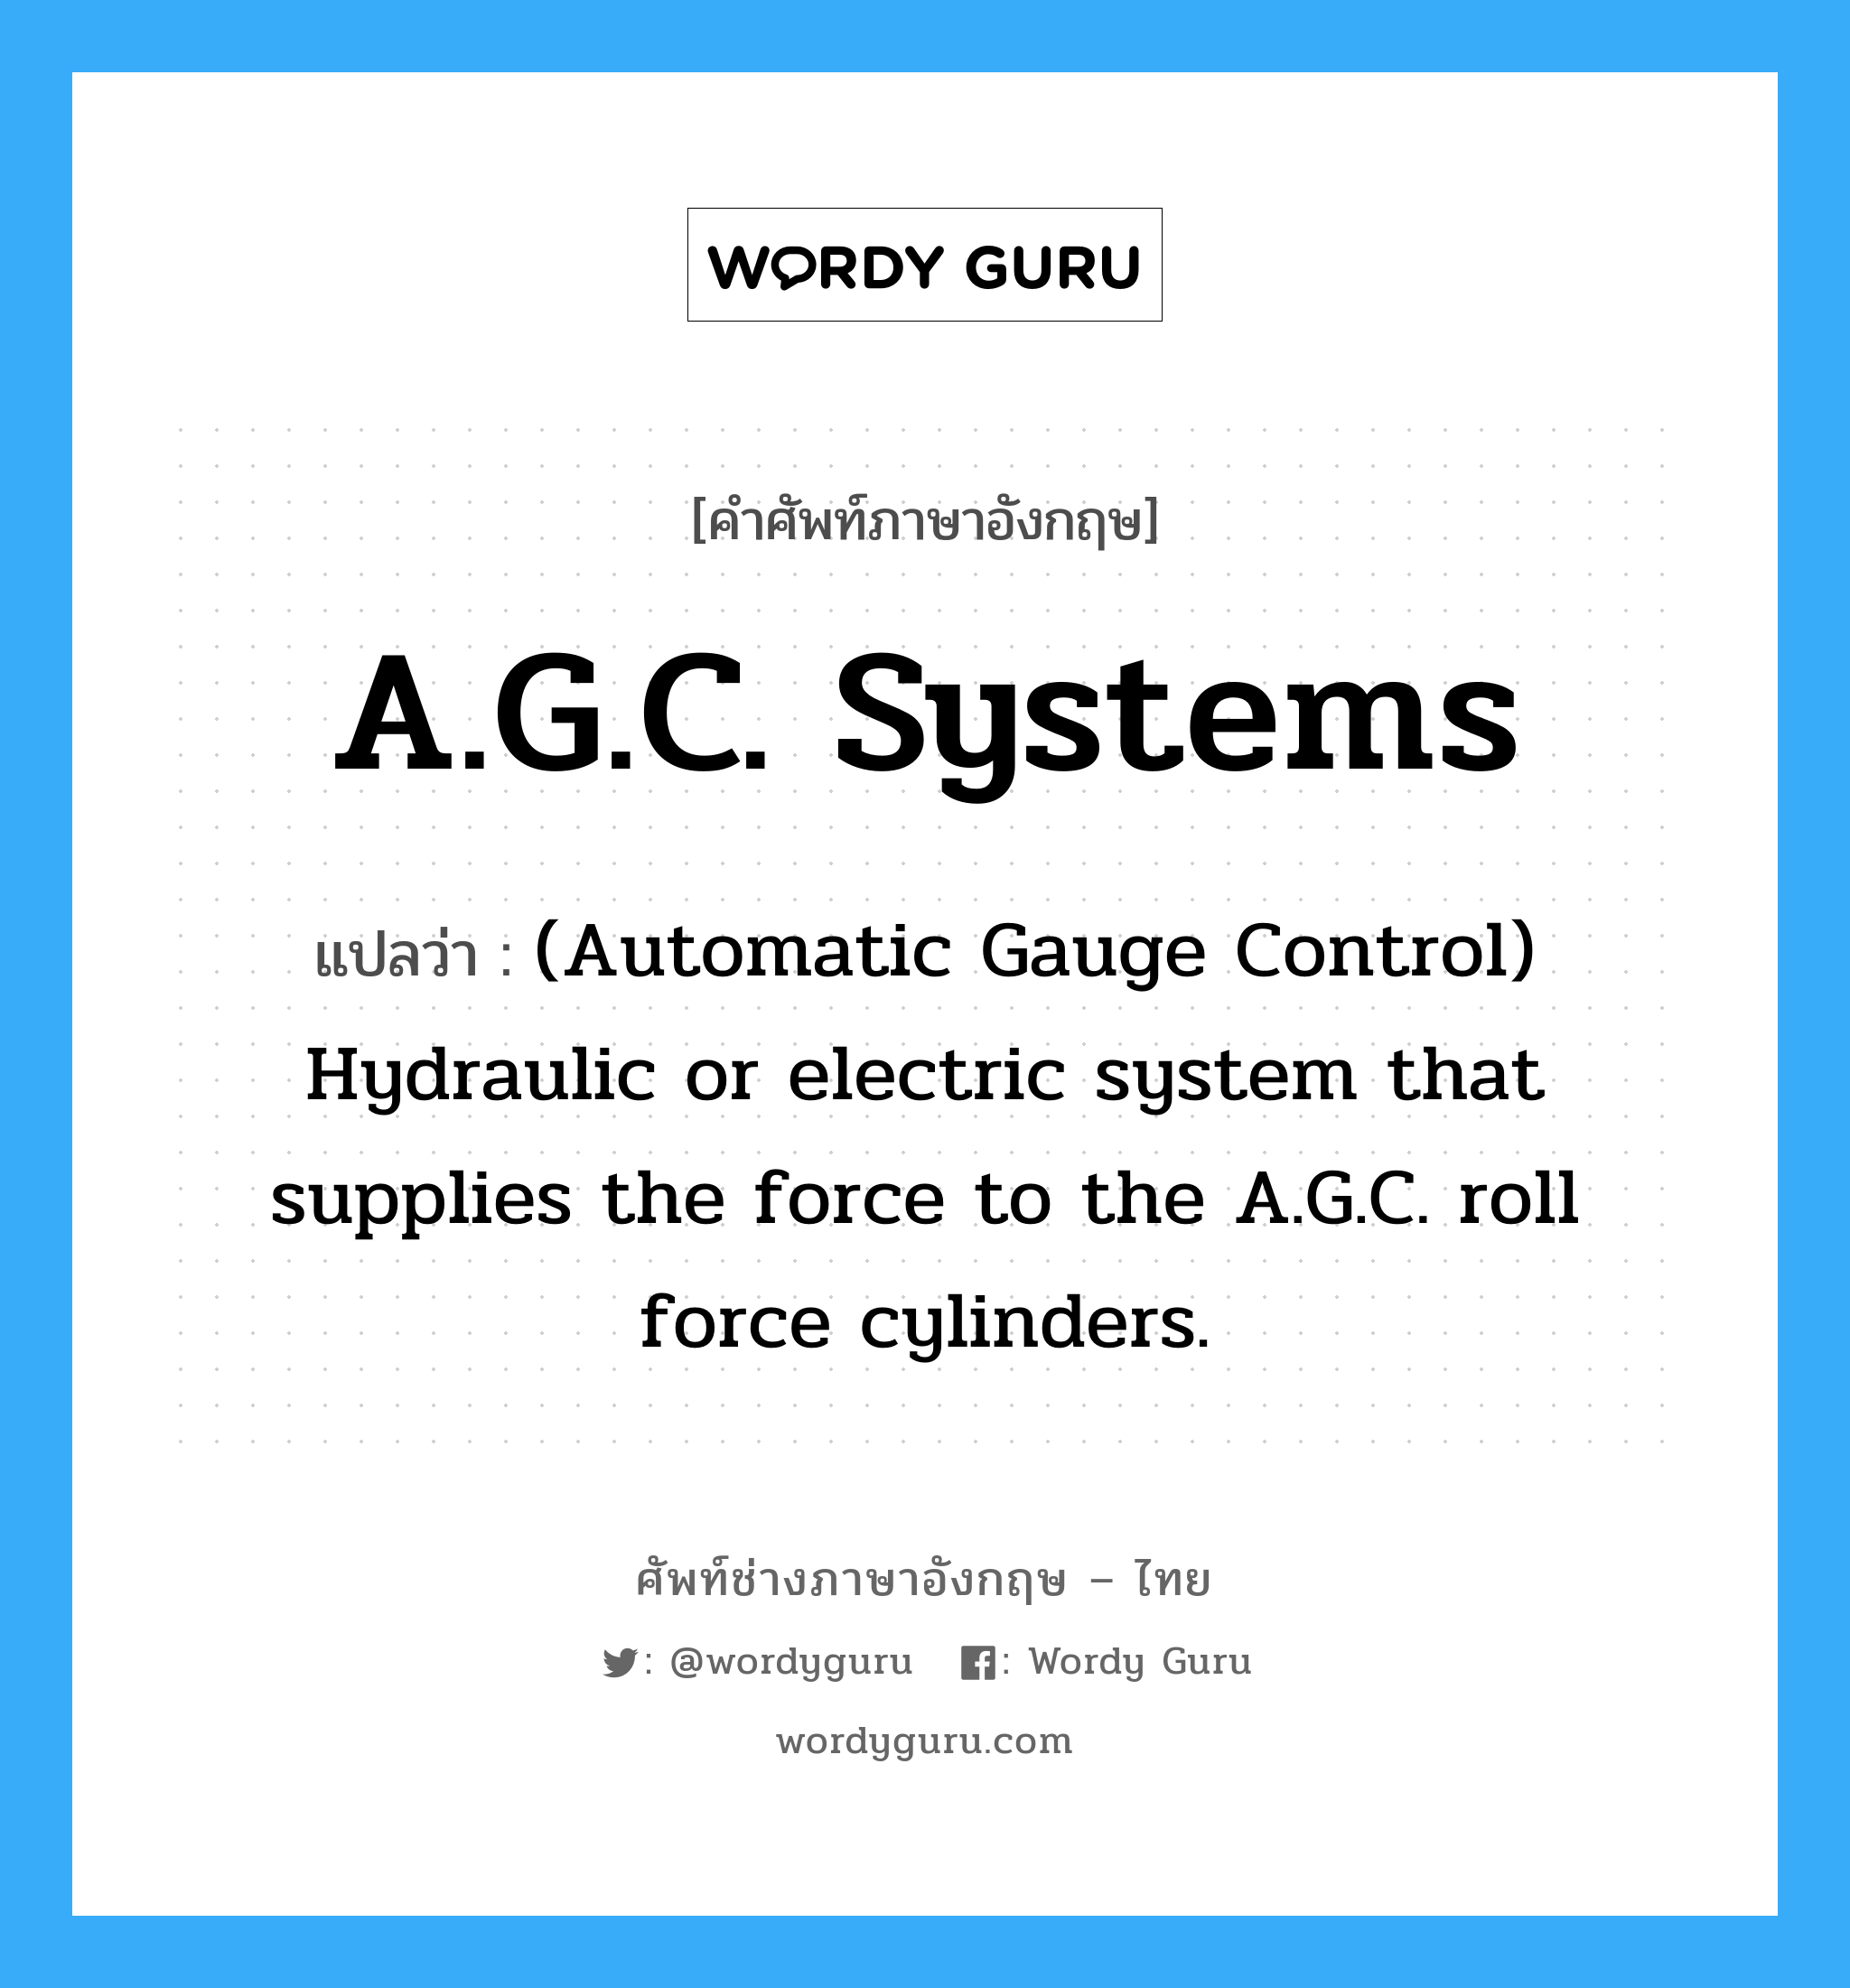 (Automatic Gauge Control) Hydraulic or electric system that supplies the force to the A.G.C. roll force cylinders. ภาษาอังกฤษ?, คำศัพท์ช่างภาษาอังกฤษ - ไทย (Automatic Gauge Control) Hydraulic or electric system that supplies the force to the A.G.C. roll force cylinders. คำศัพท์ภาษาอังกฤษ (Automatic Gauge Control) Hydraulic or electric system that supplies the force to the A.G.C. roll force cylinders. แปลว่า A.G.C. Systems